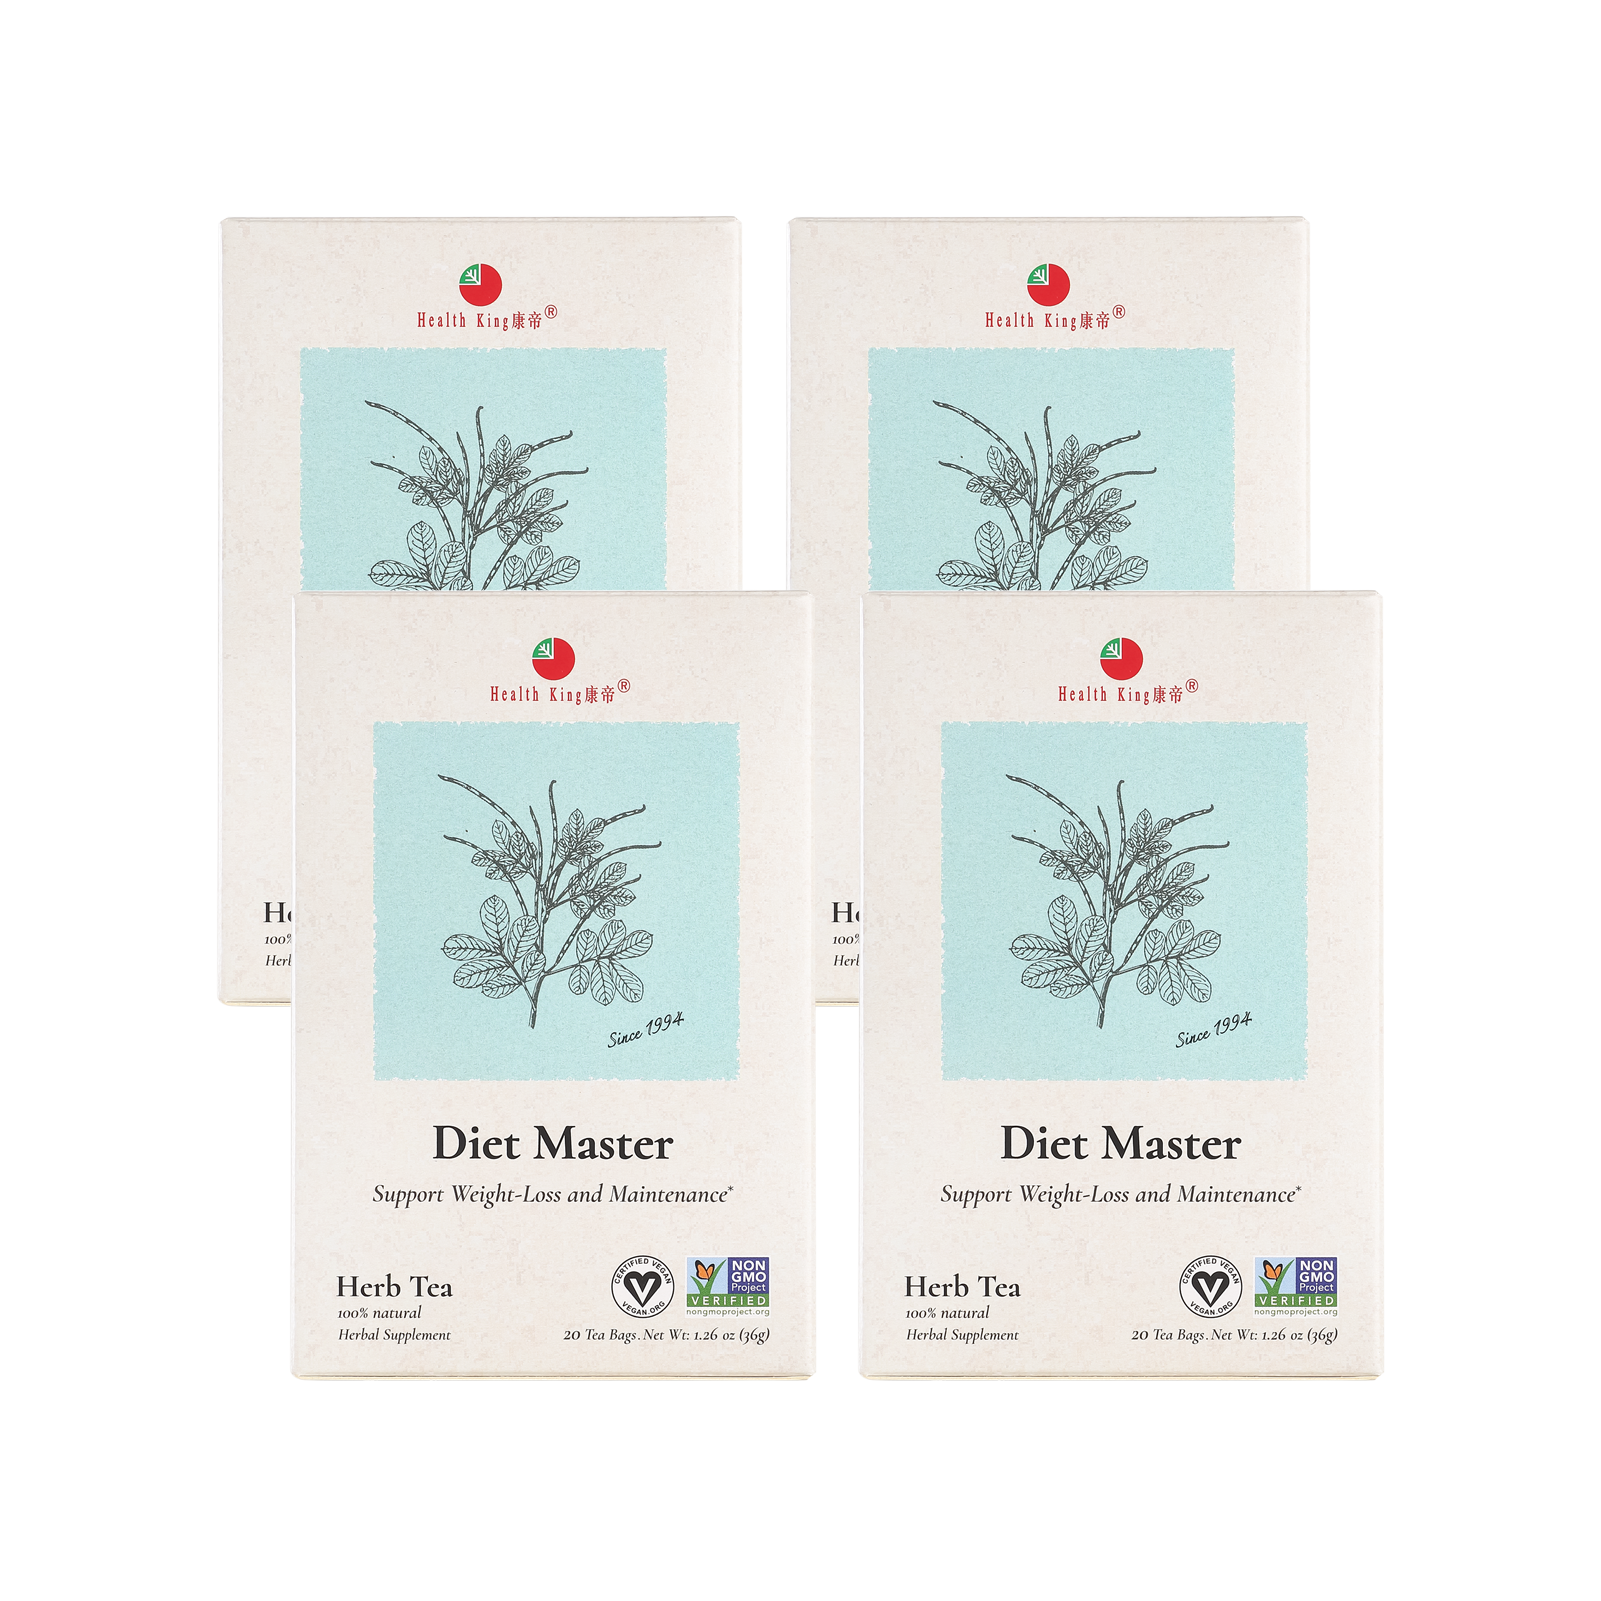 Four  Diet Master Herb Tea packets with branding visible